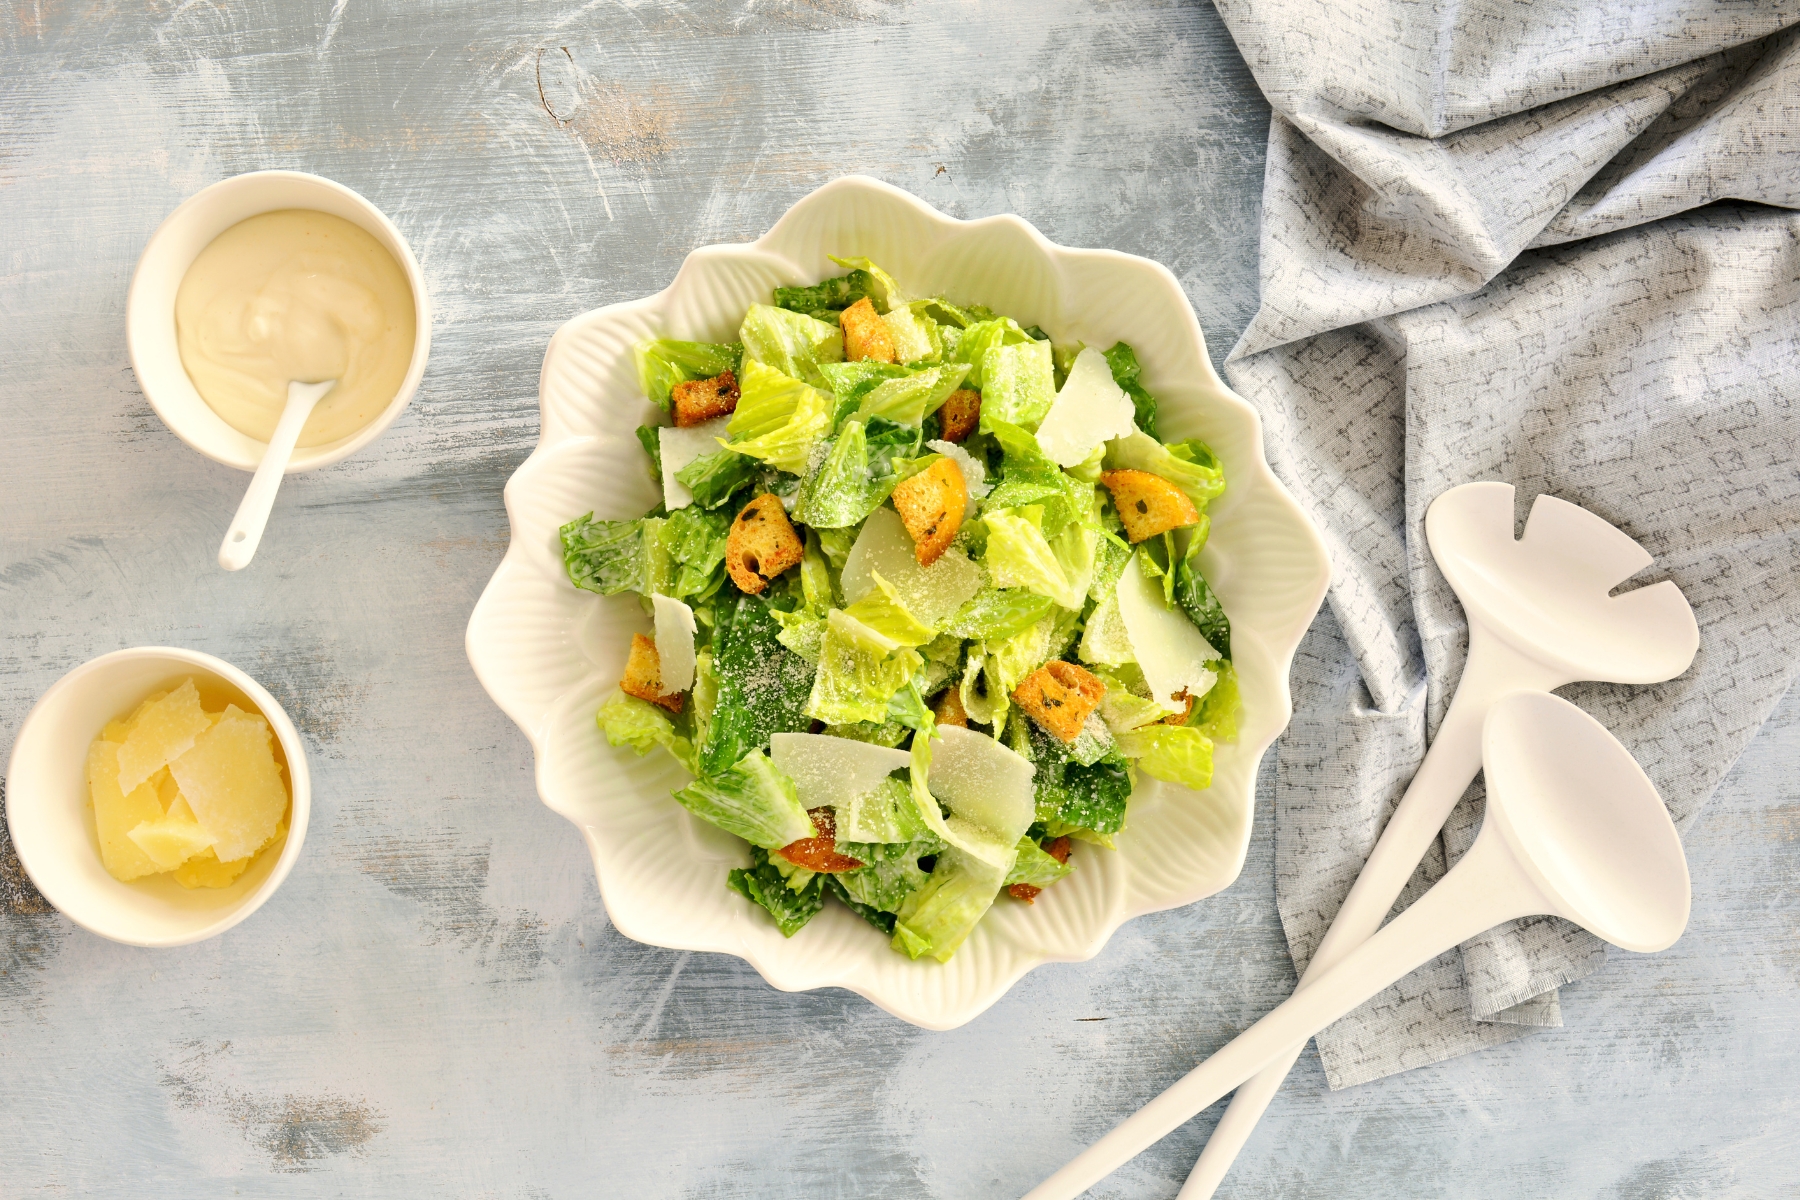 Scalloped edge white bowl of chopped romaine lettuce and croutons. There are white salad tongs, a bowl of creamy dressing and a bowl of parmesan cheese shards beside the bowl.